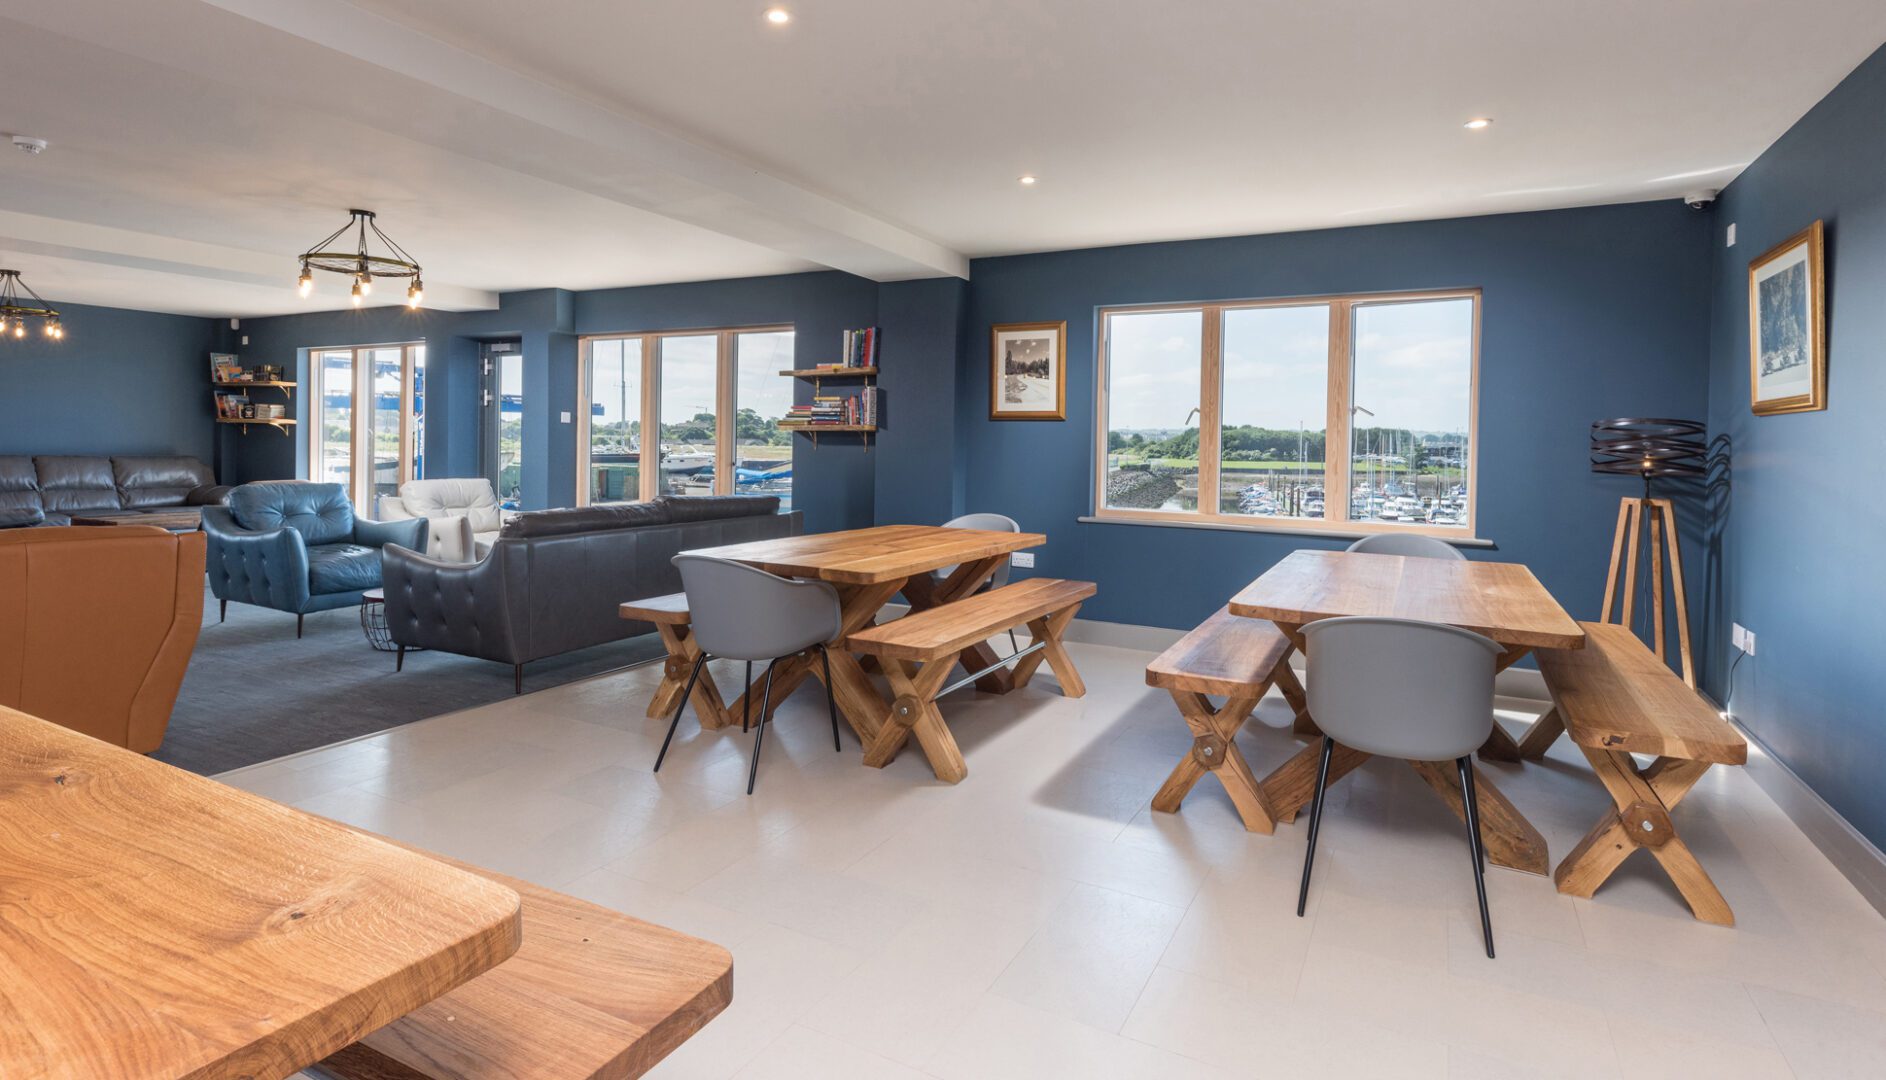 lounge with tables at Radcliffes Lodge Boutique hostel on the Northumberland coast